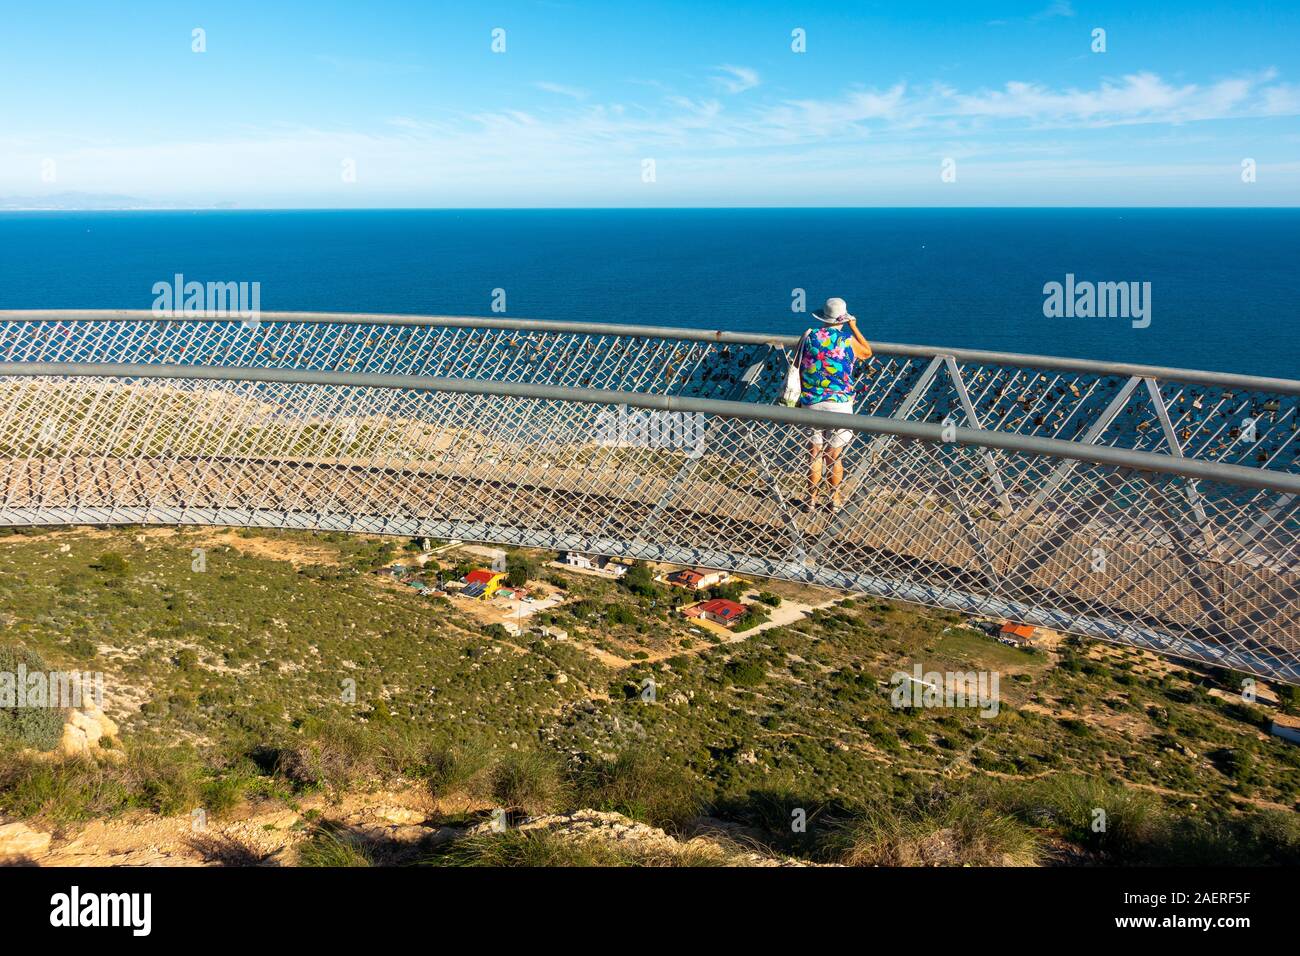 Middle aged woman wearing a sun hat looking at the view from the Santa Pola Skywalk viewing platform on the cliffs above Partida Bancal de la Arena, A Stock Photo